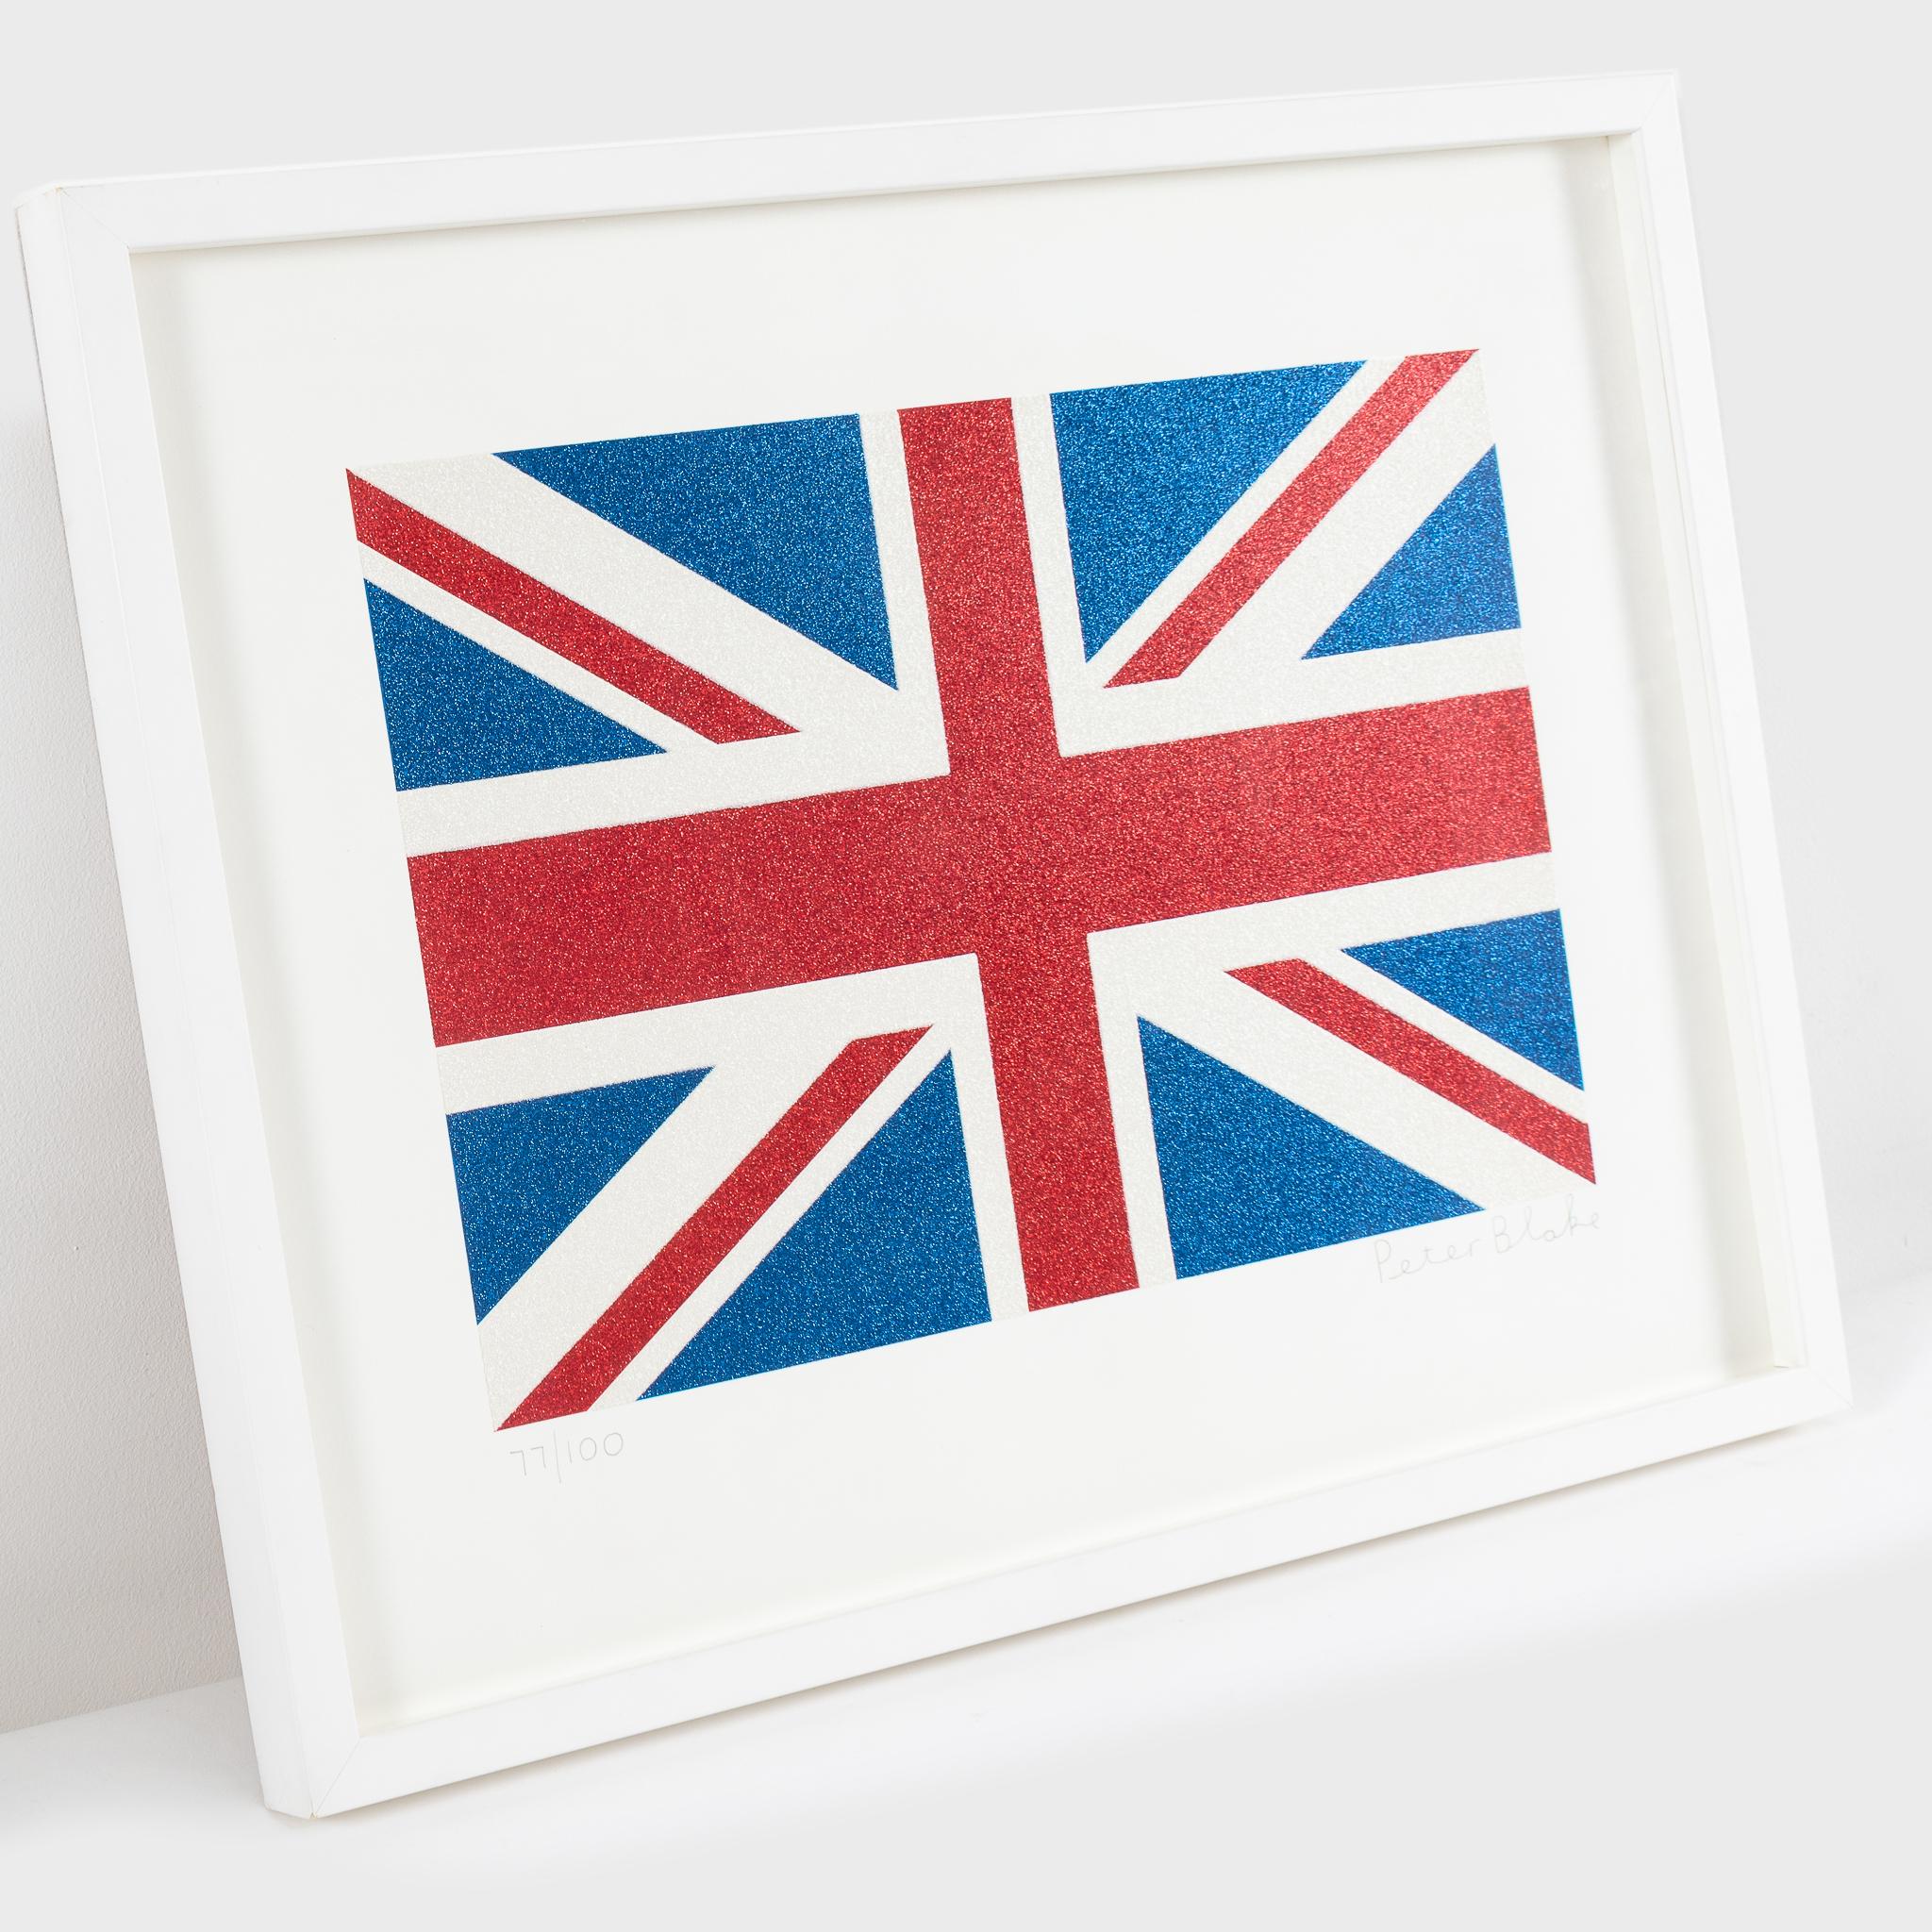 Small Union Flag - Print by Peter Blake